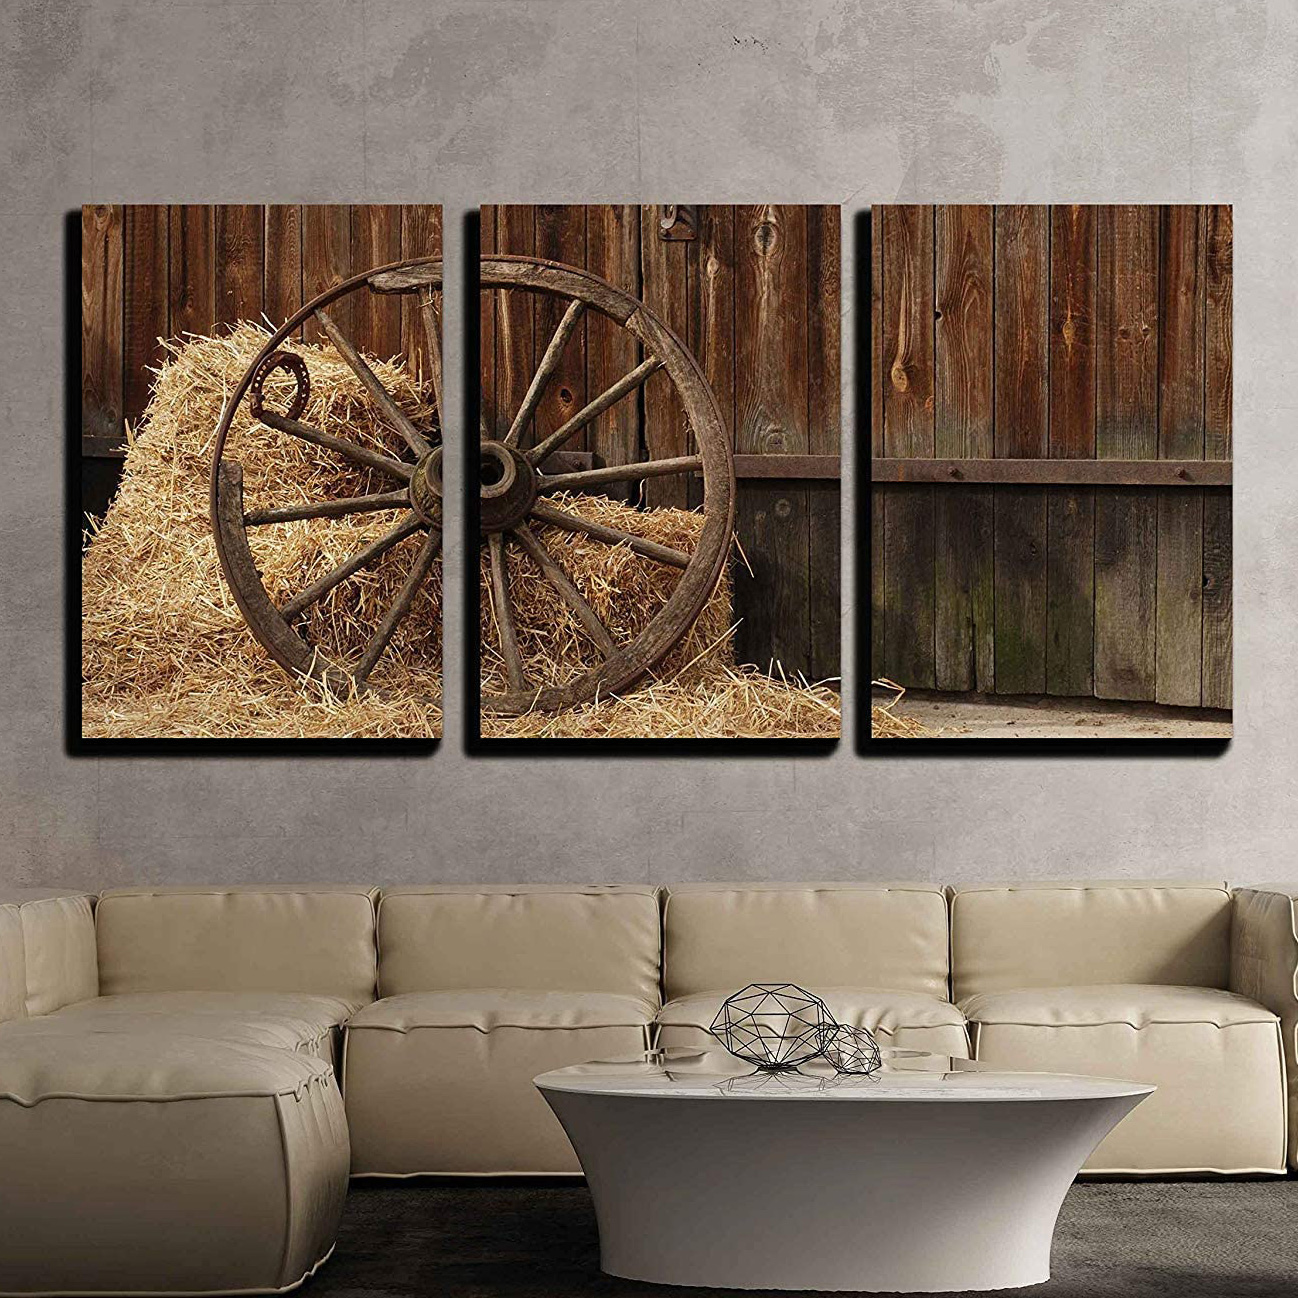 3 Piece Canvas Wall Art - The Old Antique Wheel from cart on Background of hay and barn - Modern Home Art Stretched and Framed Ready to Hang - 24